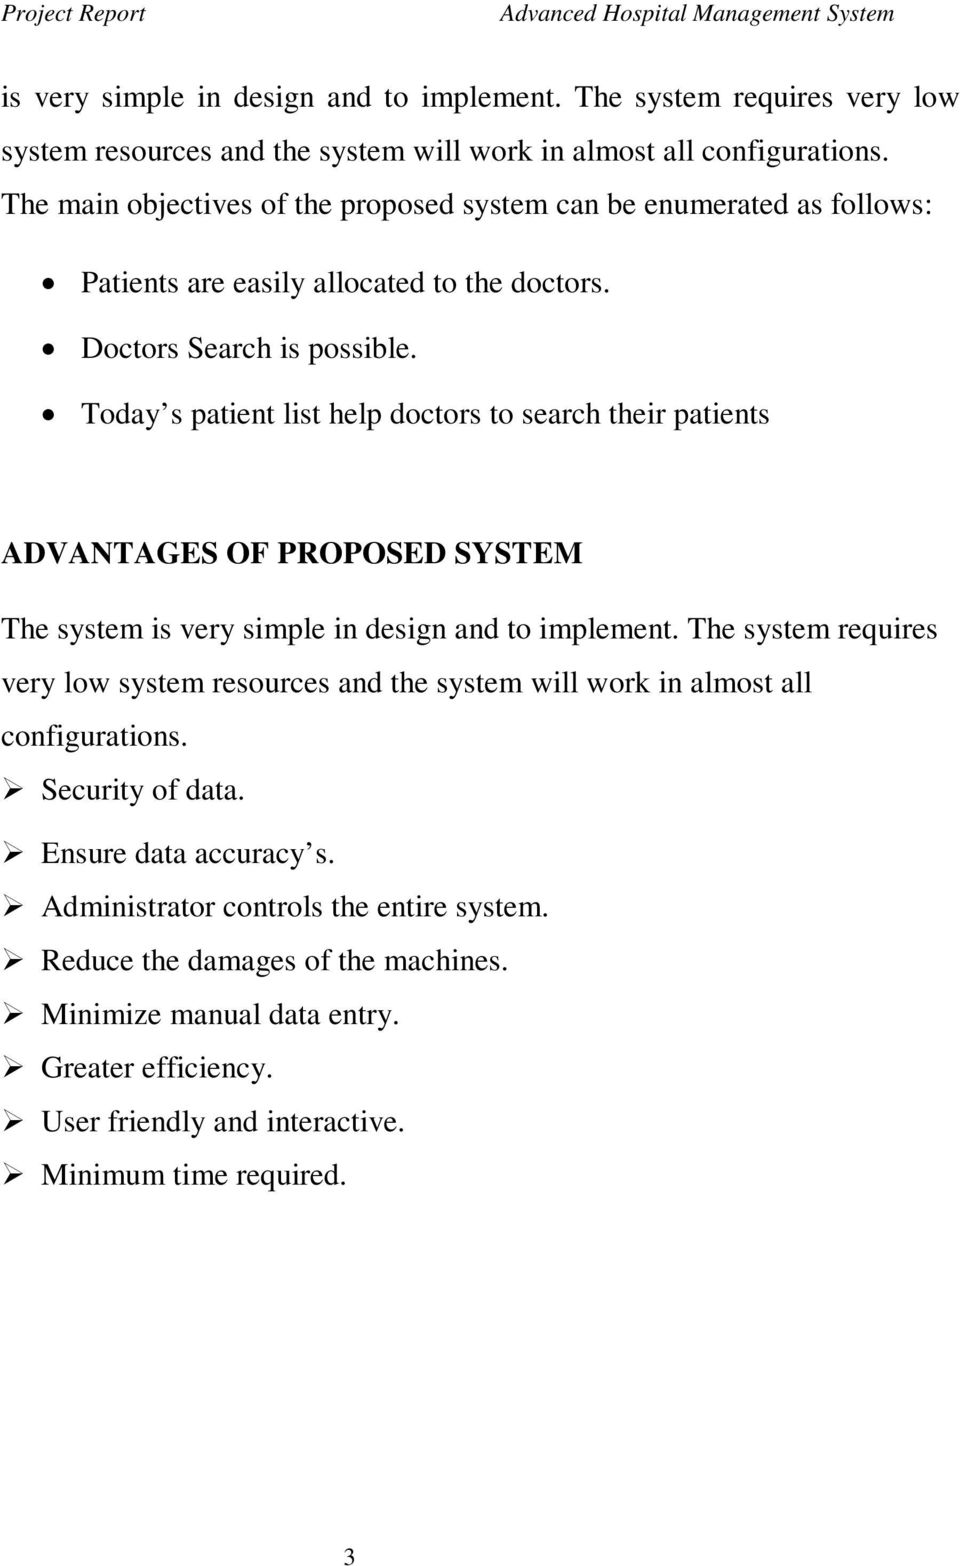 Today s patient list help doctors to search their patients ADVANTAGES OF PROPOSED SYSTEM The system  Security of data. Ensure data accuracy s. Administrator controls the entire system.